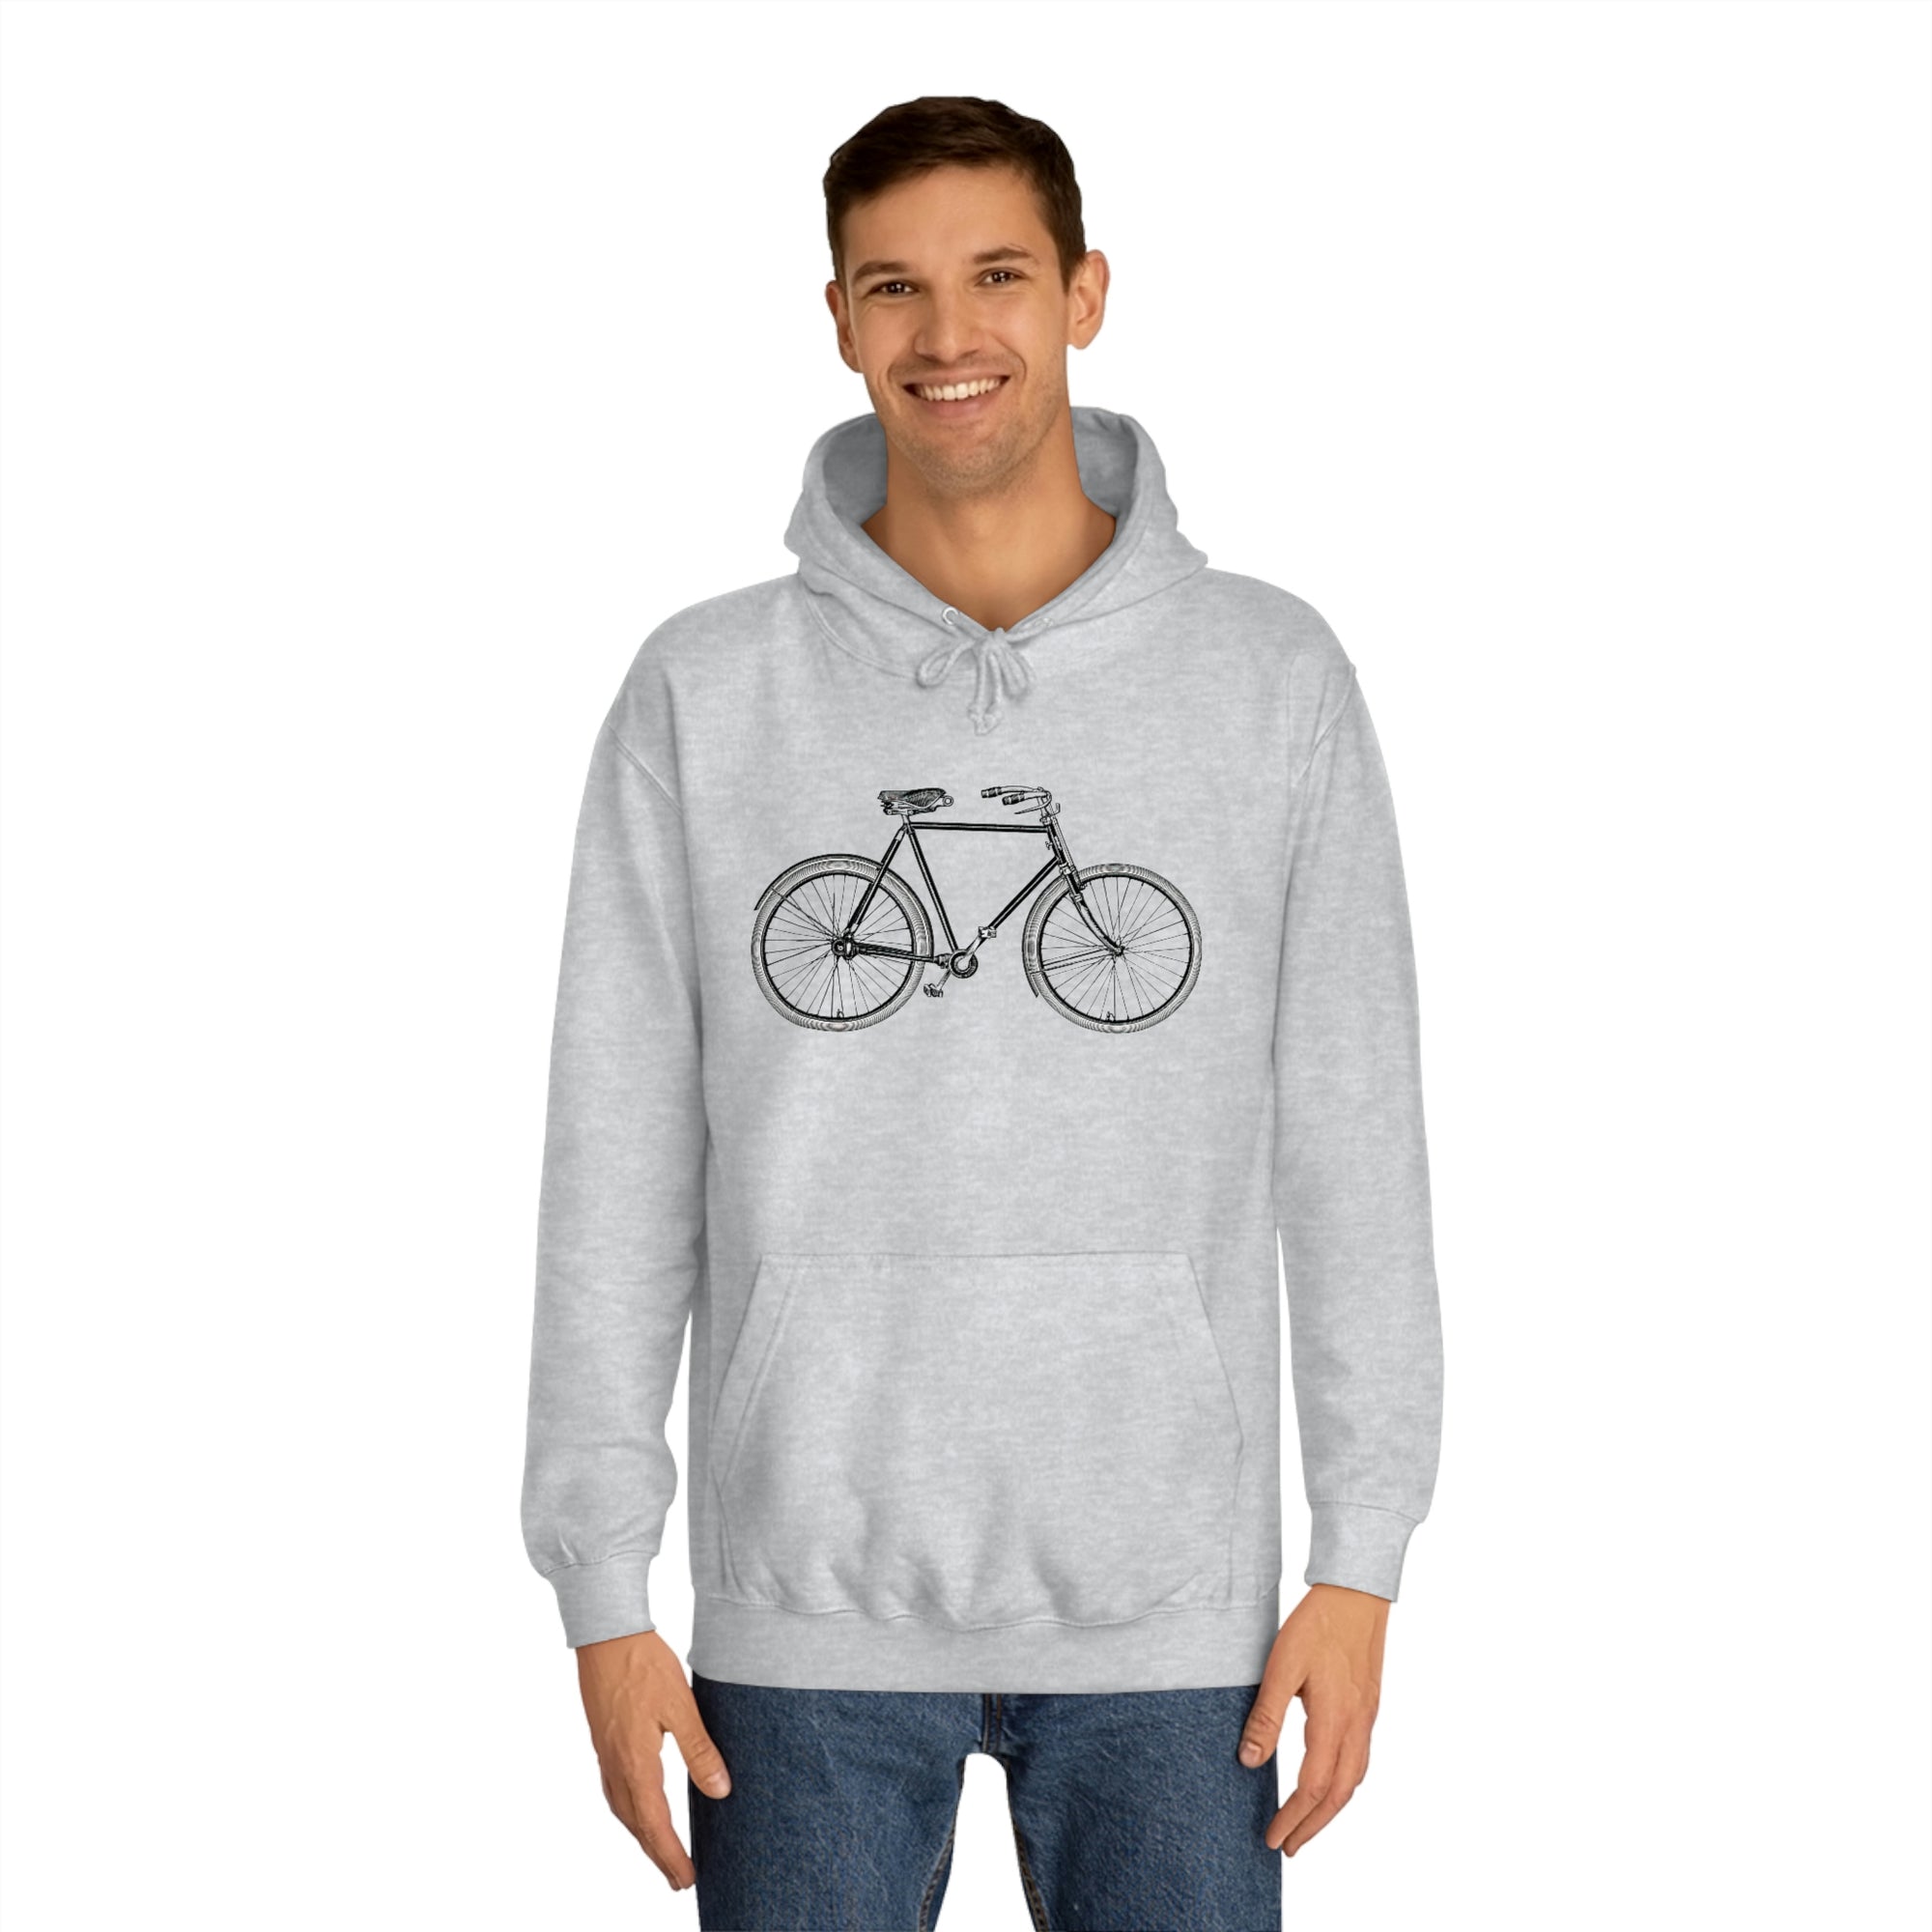 Retro Bicycle with Beetroot Pro logo on the back, Cotton/Polyester Hoodie